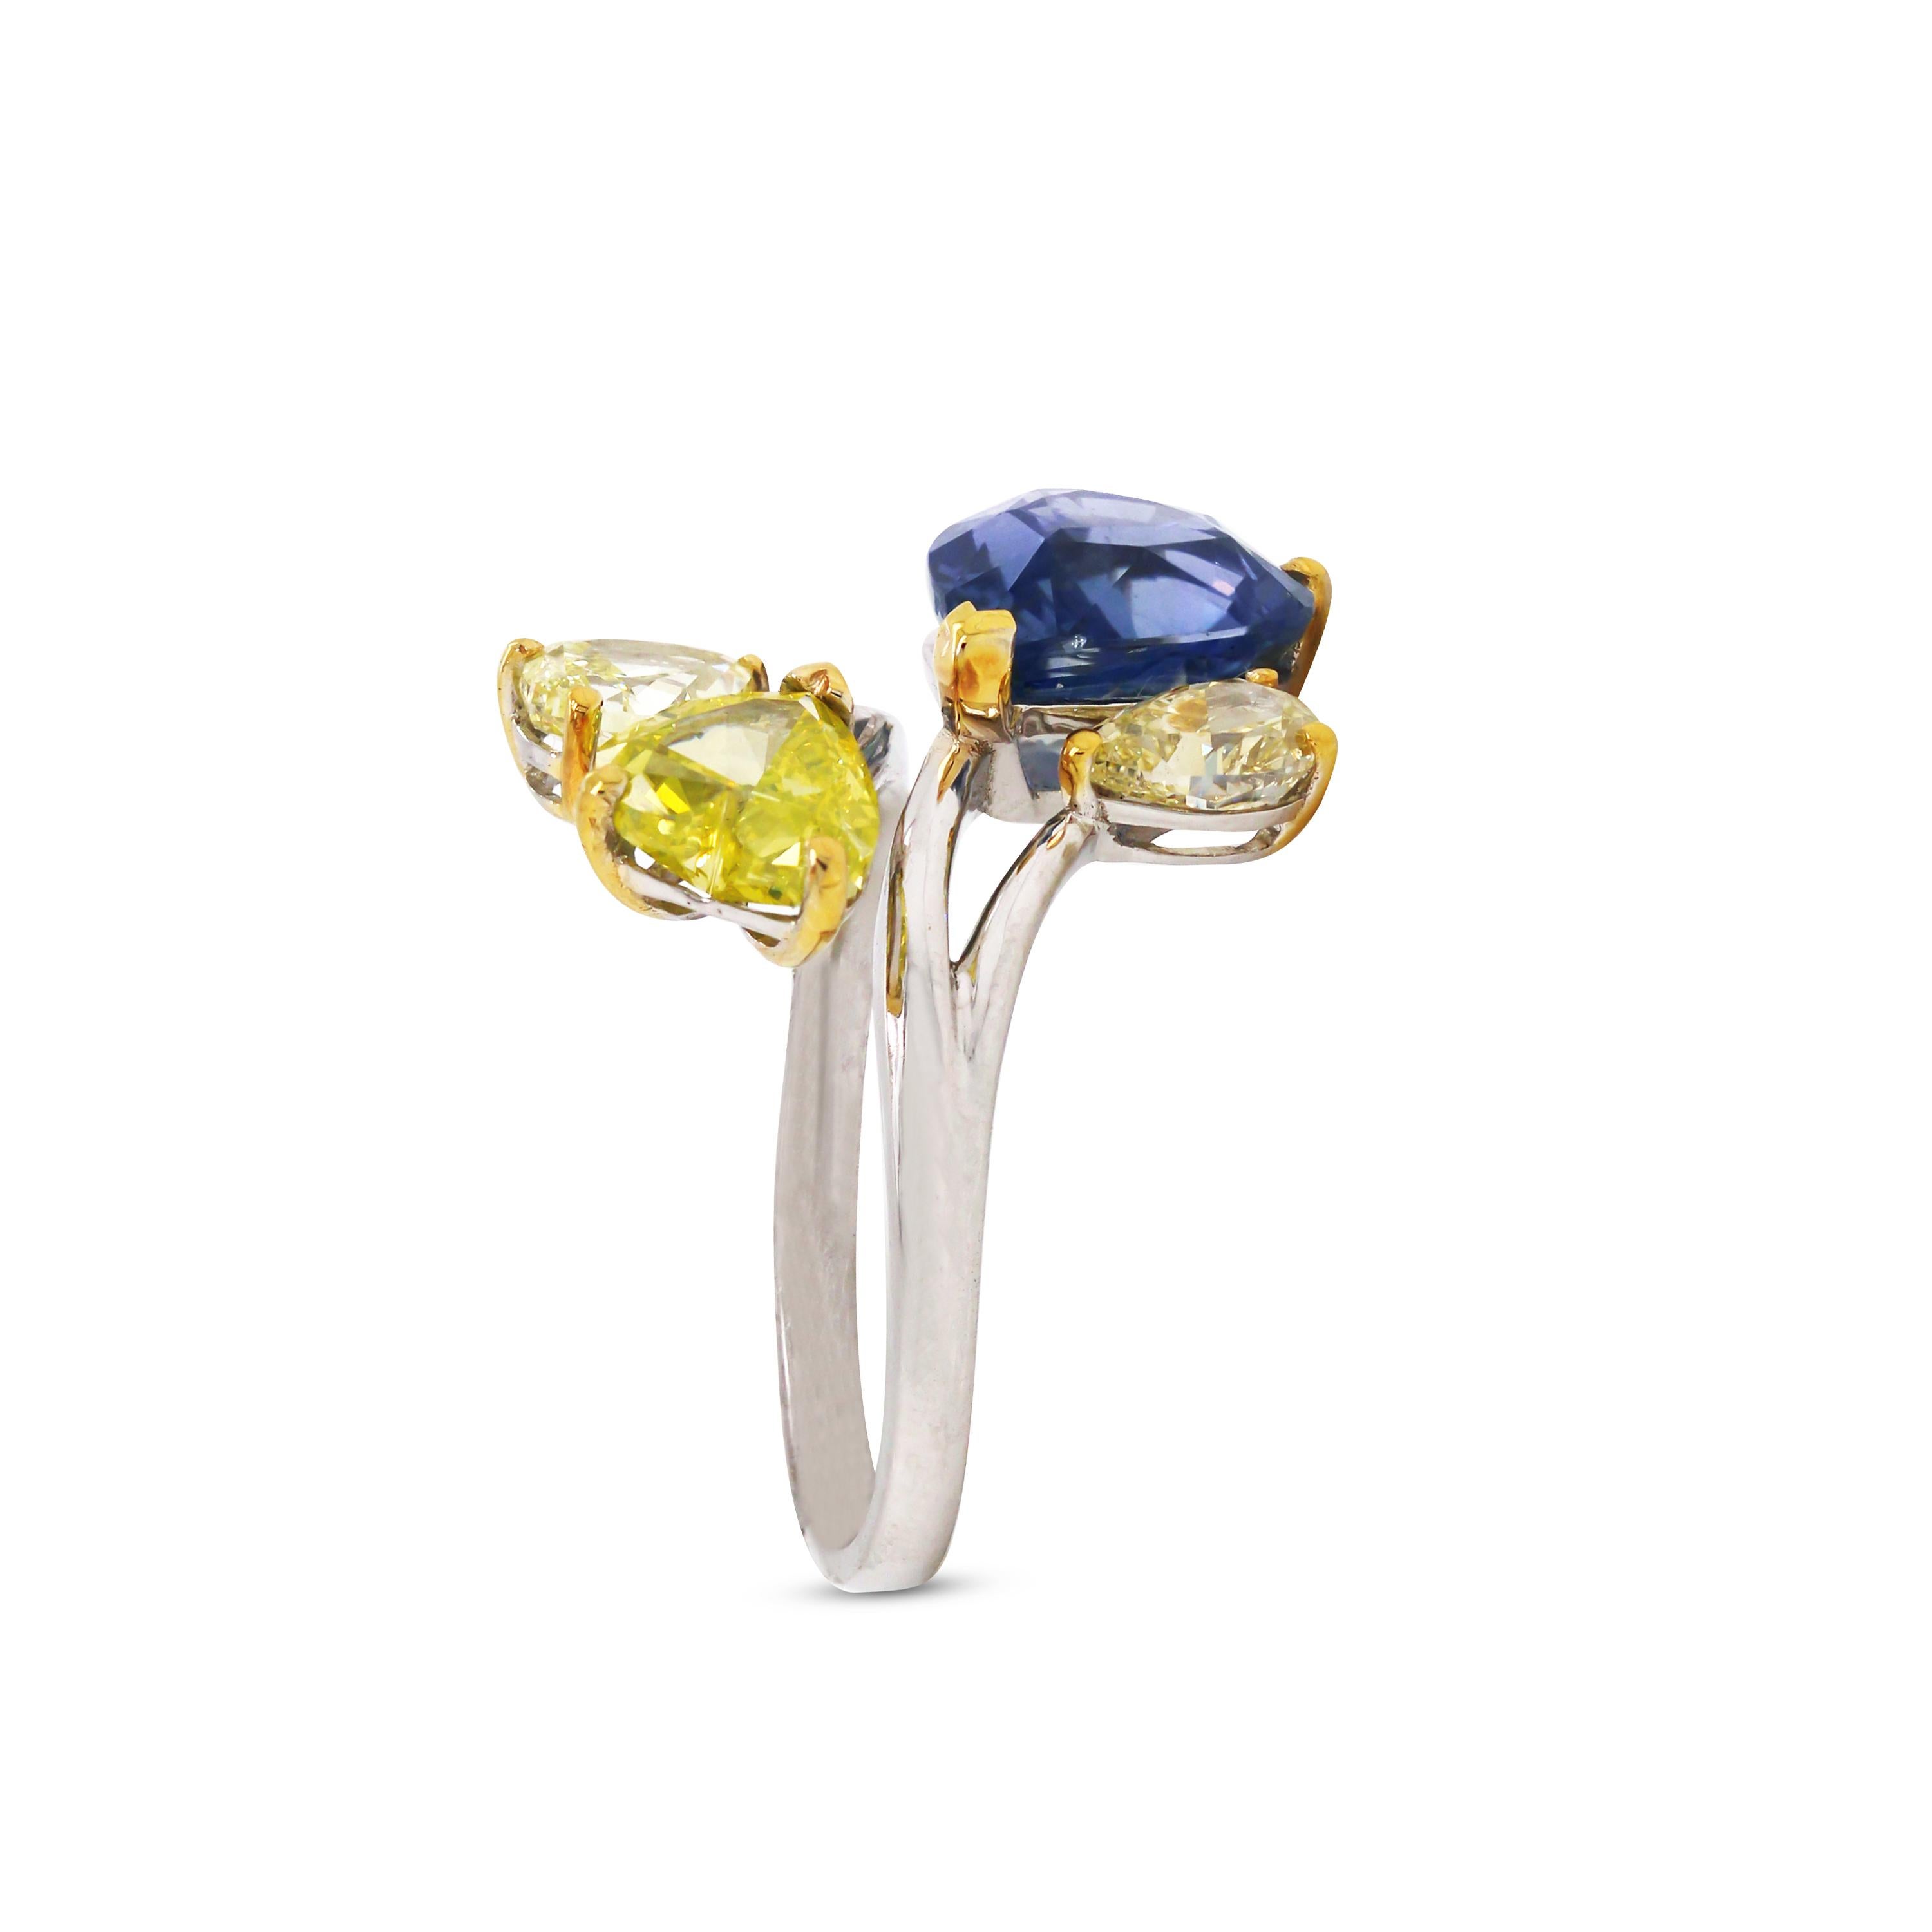 AGL 5.05 Carat Burma Blue Sapphire Fancy Yellow Diamond White Gold Cocktail Ring

This one-of-a-kind ring features a natural, no-heat Sapphire certified by AGL.

Burma Sapphire: 5.05 carat, Pear Shape, No Heat, No Clarity Enhancement. None heated